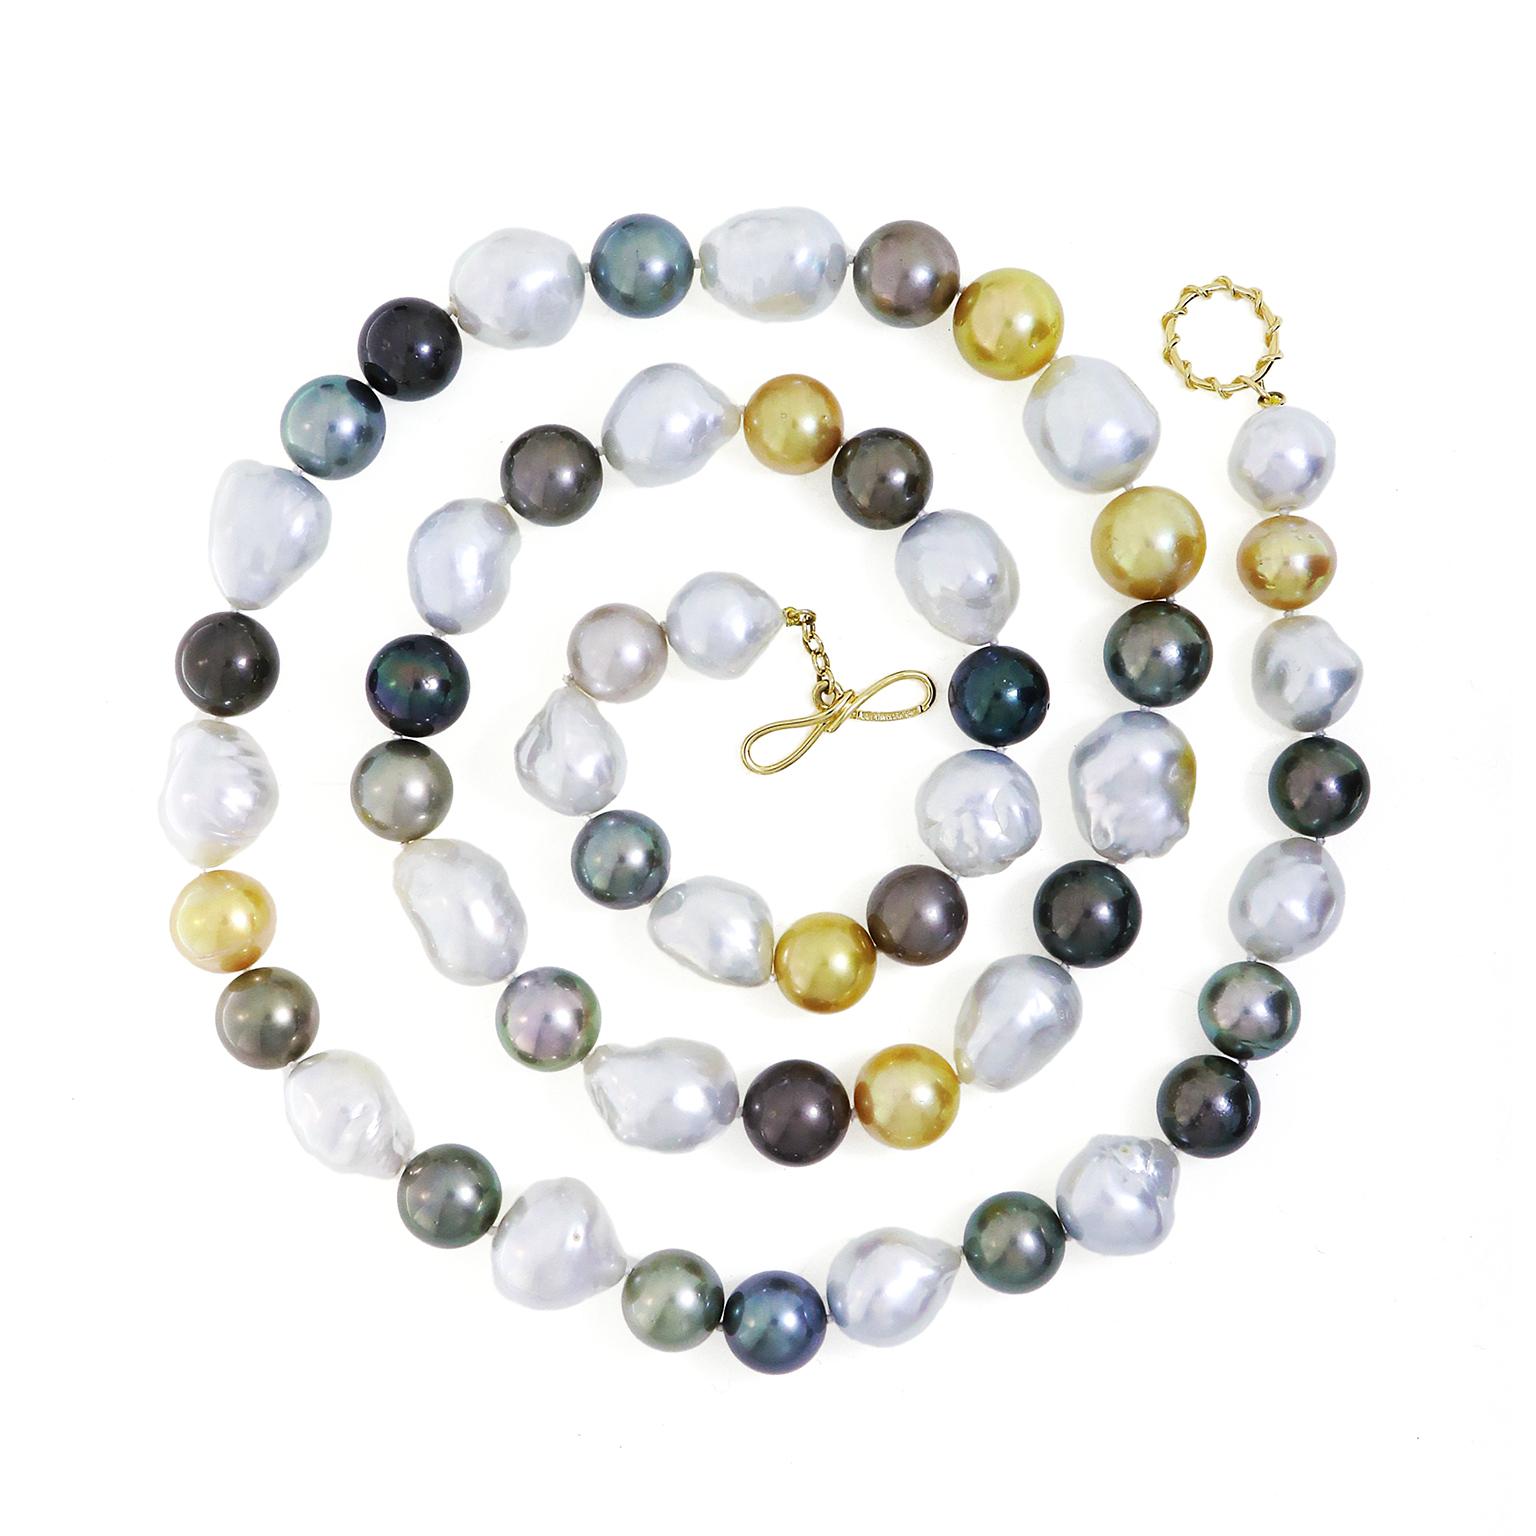 This necklace contains serene earth colored pearls. Between the Baroque south sea pearls are accents of Tahitian pearls, which include yellow, brown and gray tones. An 18k yellow gold knot and toggle clasp fastens the necklace.